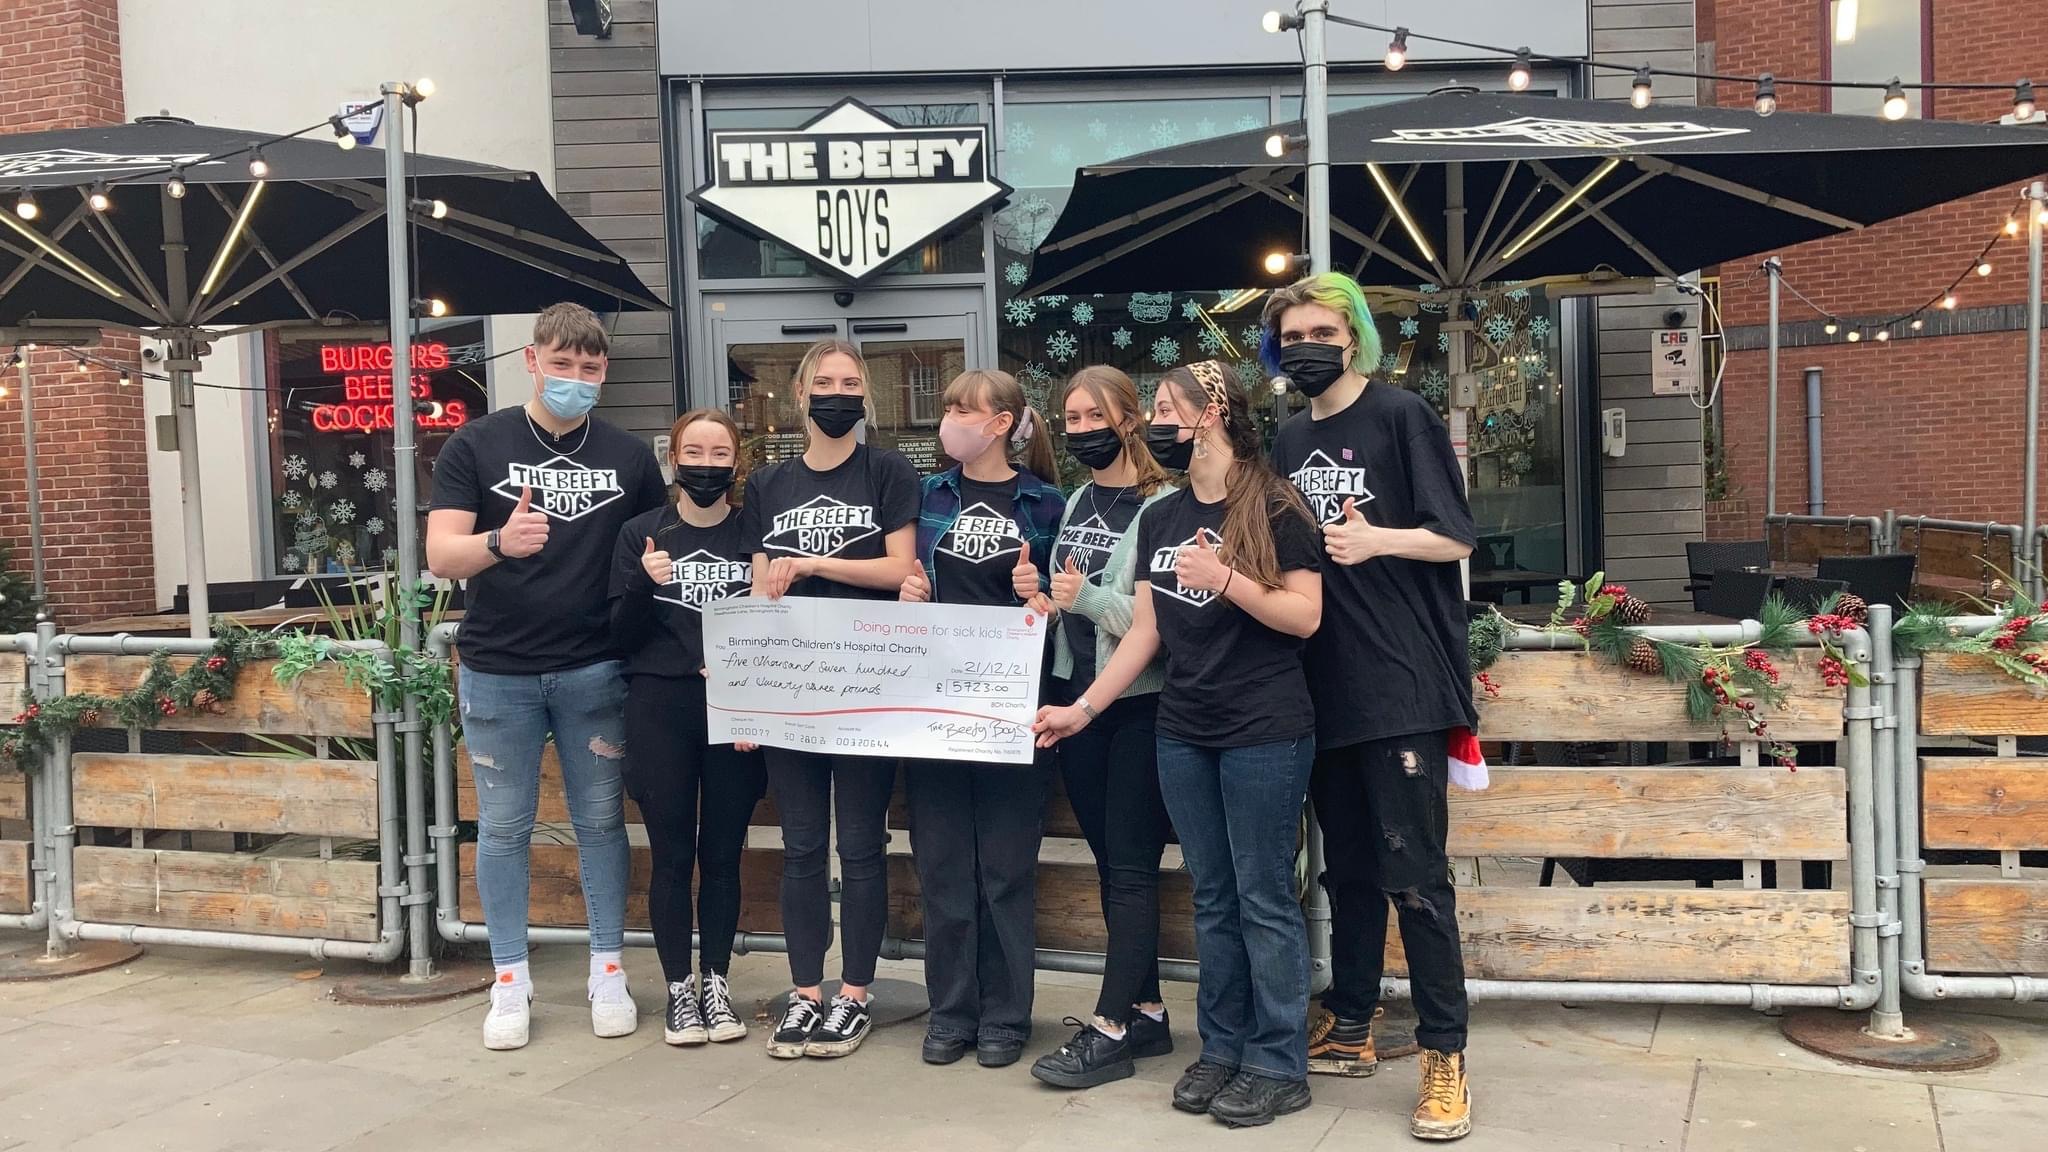 NEWS | The Beefy Boys thank customers for helping them raise £5,723 for Birmingham Children’s Hospital